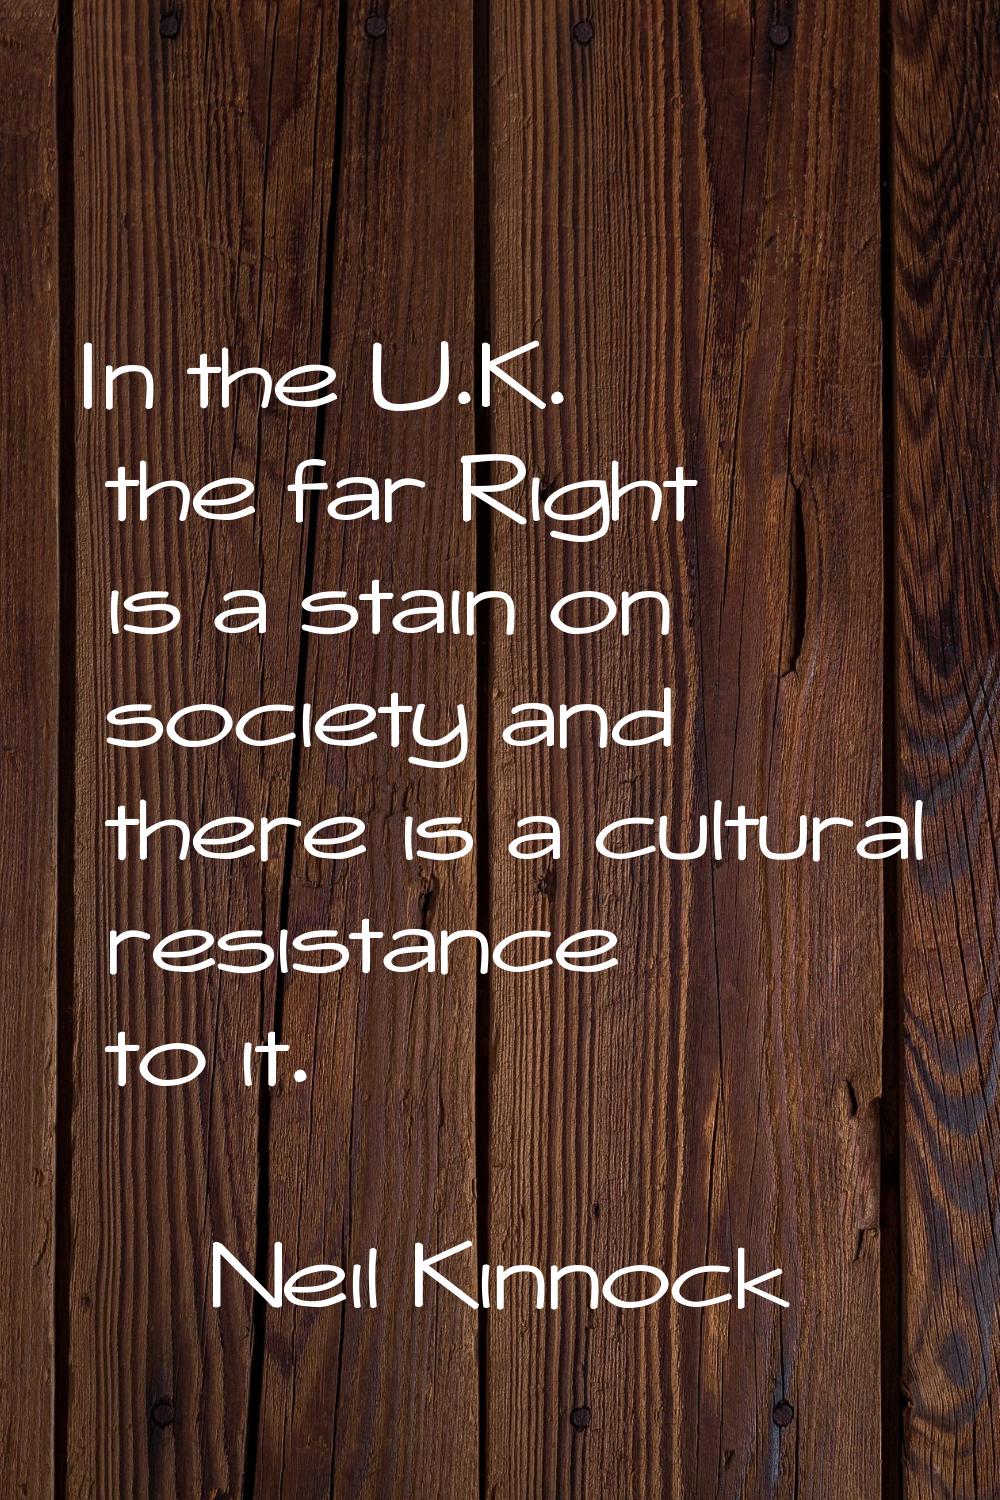 In the U.K. the far Right is a stain on society and there is a cultural resistance to it.